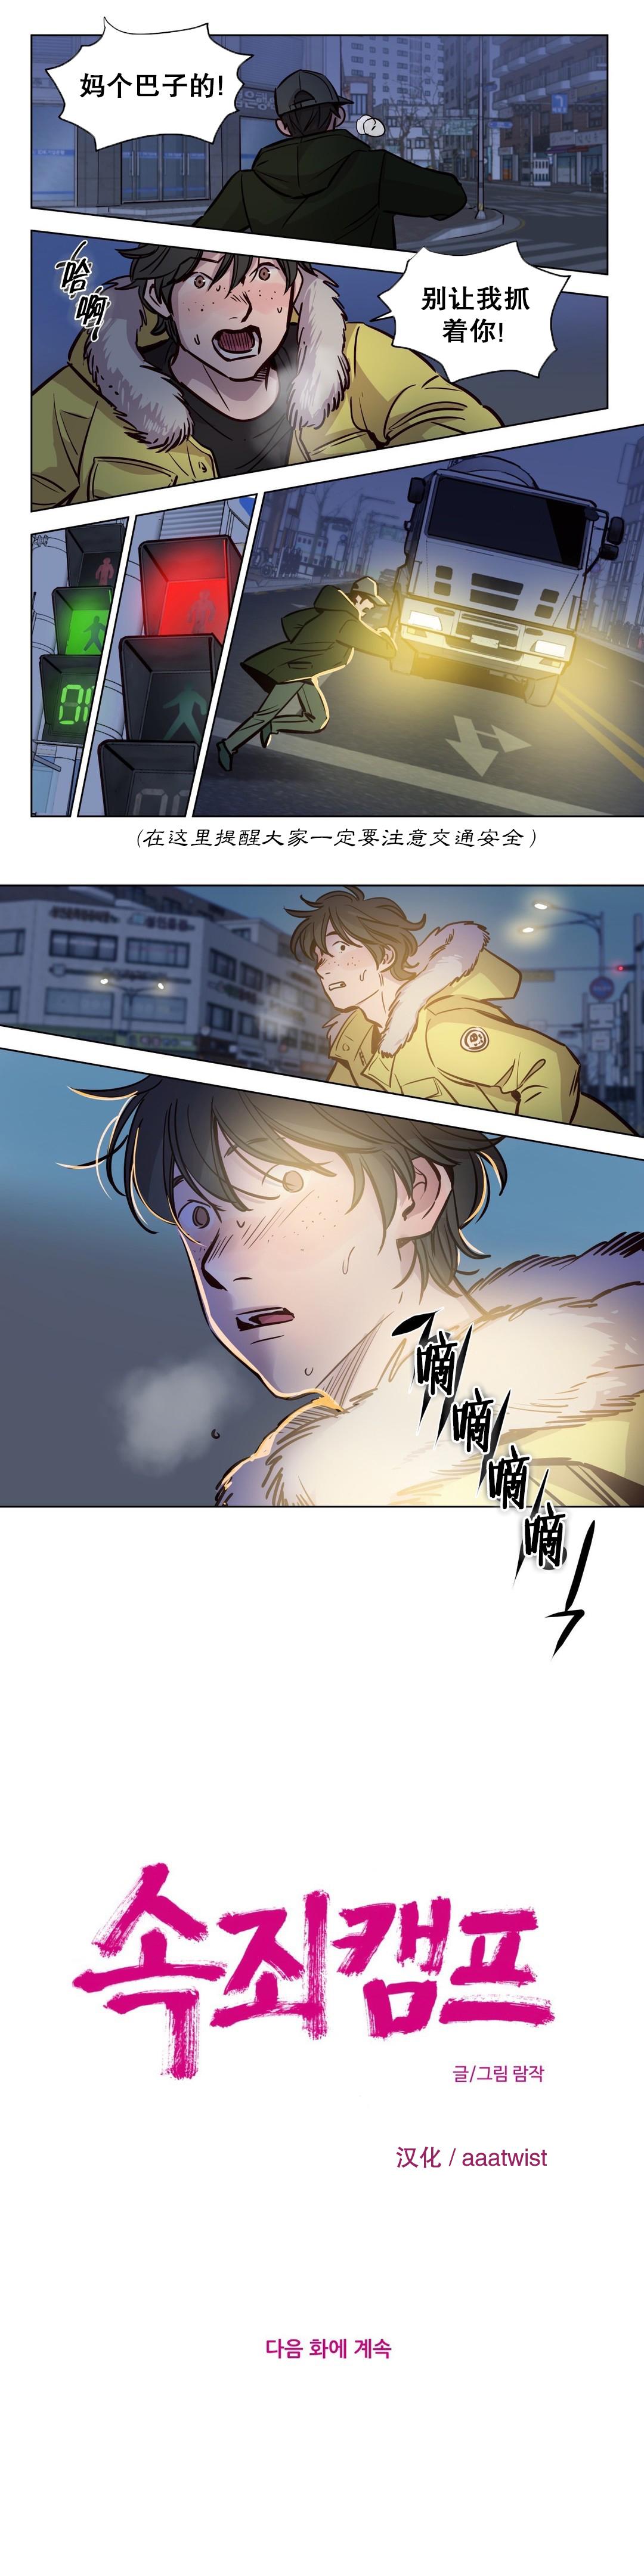 [Ramjak] 赎罪营(Atonement Camp) Ch.50-52 (Chinese) 33